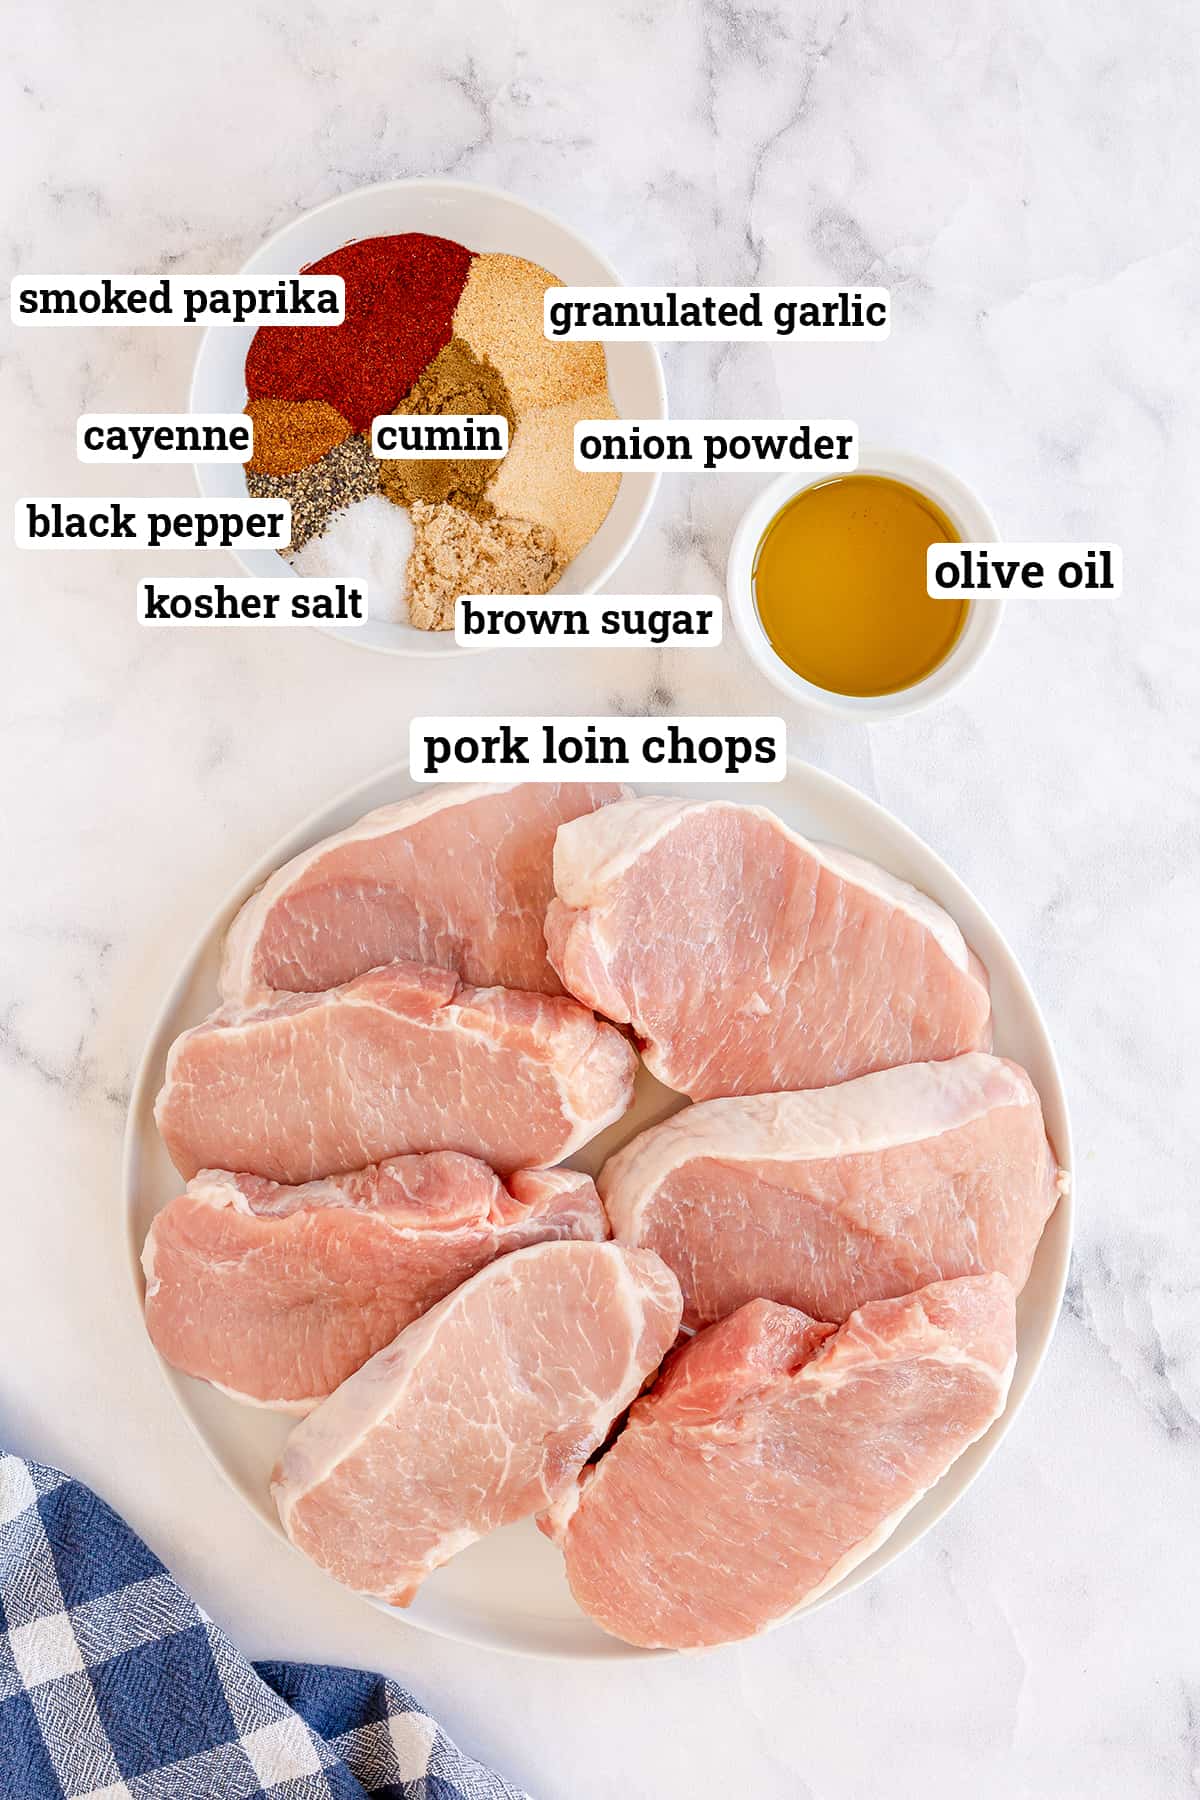 Pork loin chops, dried seasonings, and olive oil with overlay text.